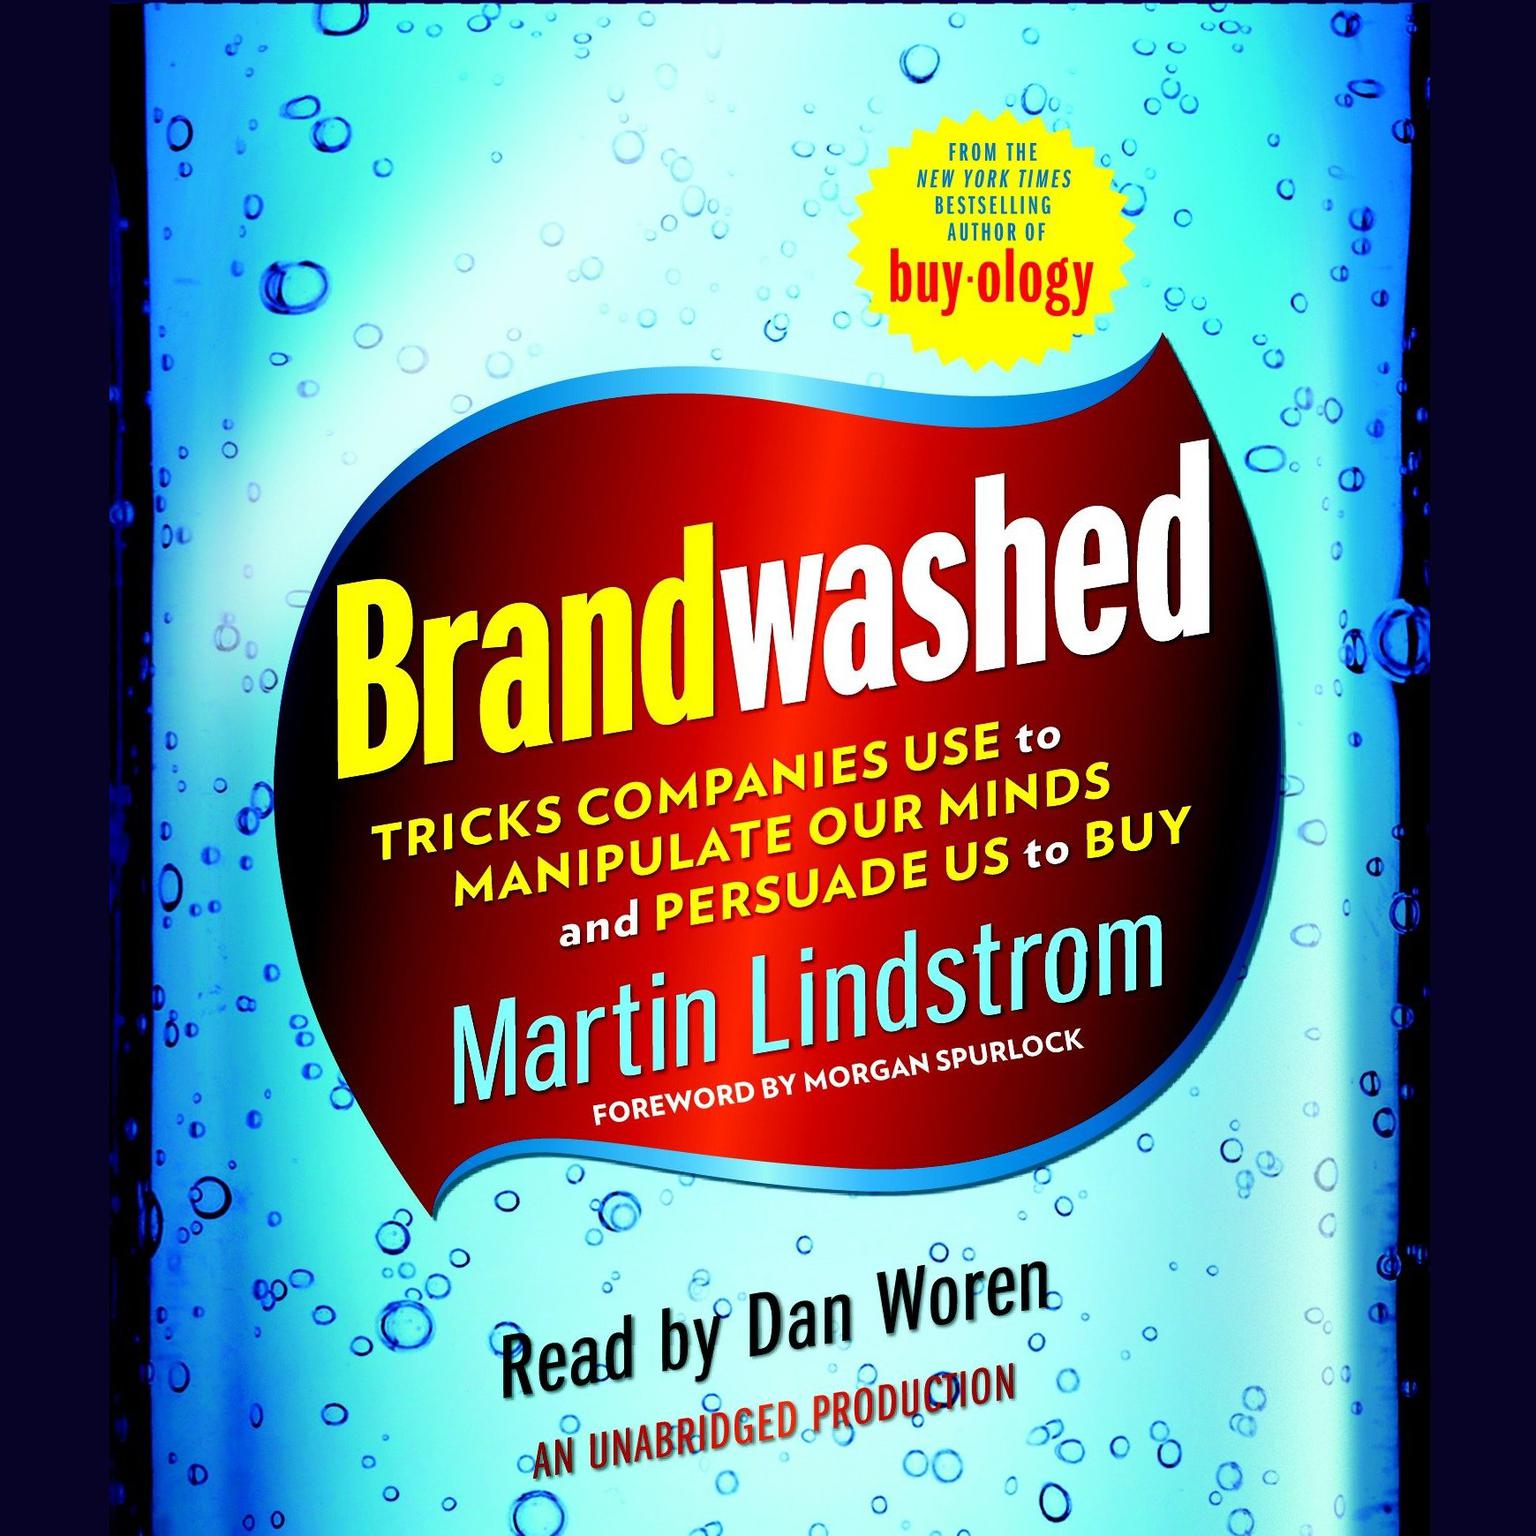 Brandwashed: Tricks Companies Use to Manipulate Our Minds and Persuade Us to Buy Audiobook, by Martin Lindstrom